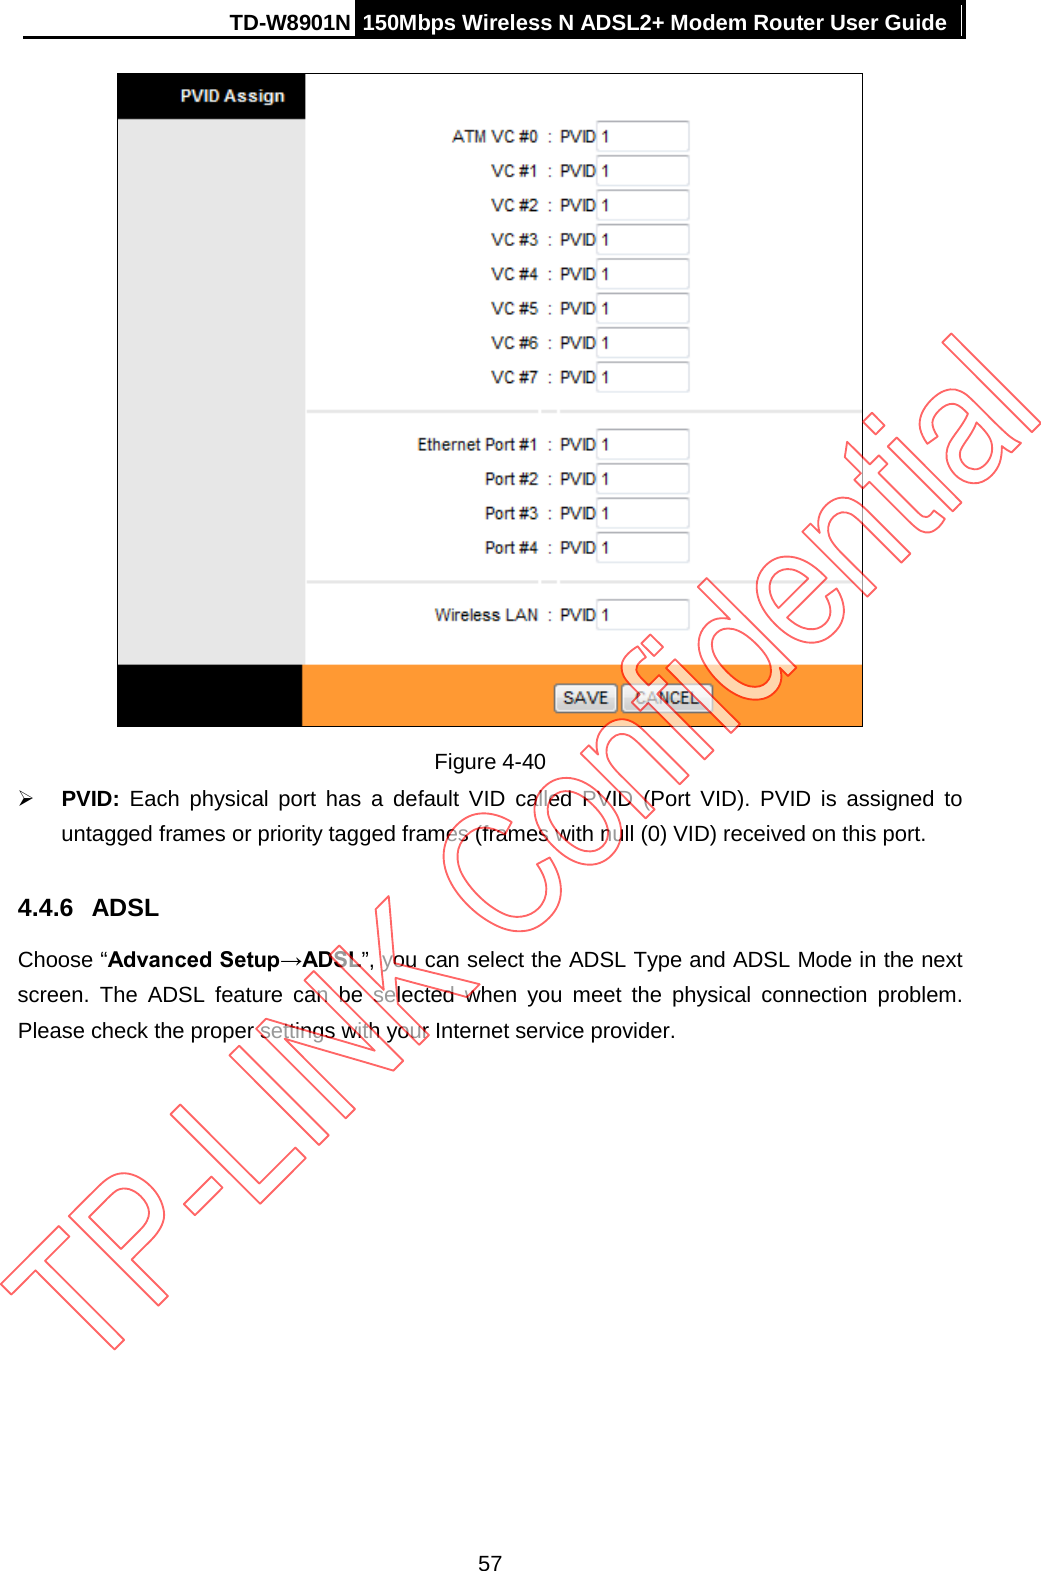 TD-W8901N 150Mbps Wireless N ADSL2+ Modem Router User Guide   Figure 4-40  PVID: Each physical port has a default VID called PVID (Port VID). PVID is assigned to untagged frames or priority tagged frames (frames with null (0) VID) received on this port. 4.4.6 ADSL Choose “Advanced Setup→ADSL”, you can select the ADSL Type and ADSL Mode in the next screen. The ADSL feature can be selected when you meet the physical connection problem. Please check the proper settings with your Internet service provider. 57 